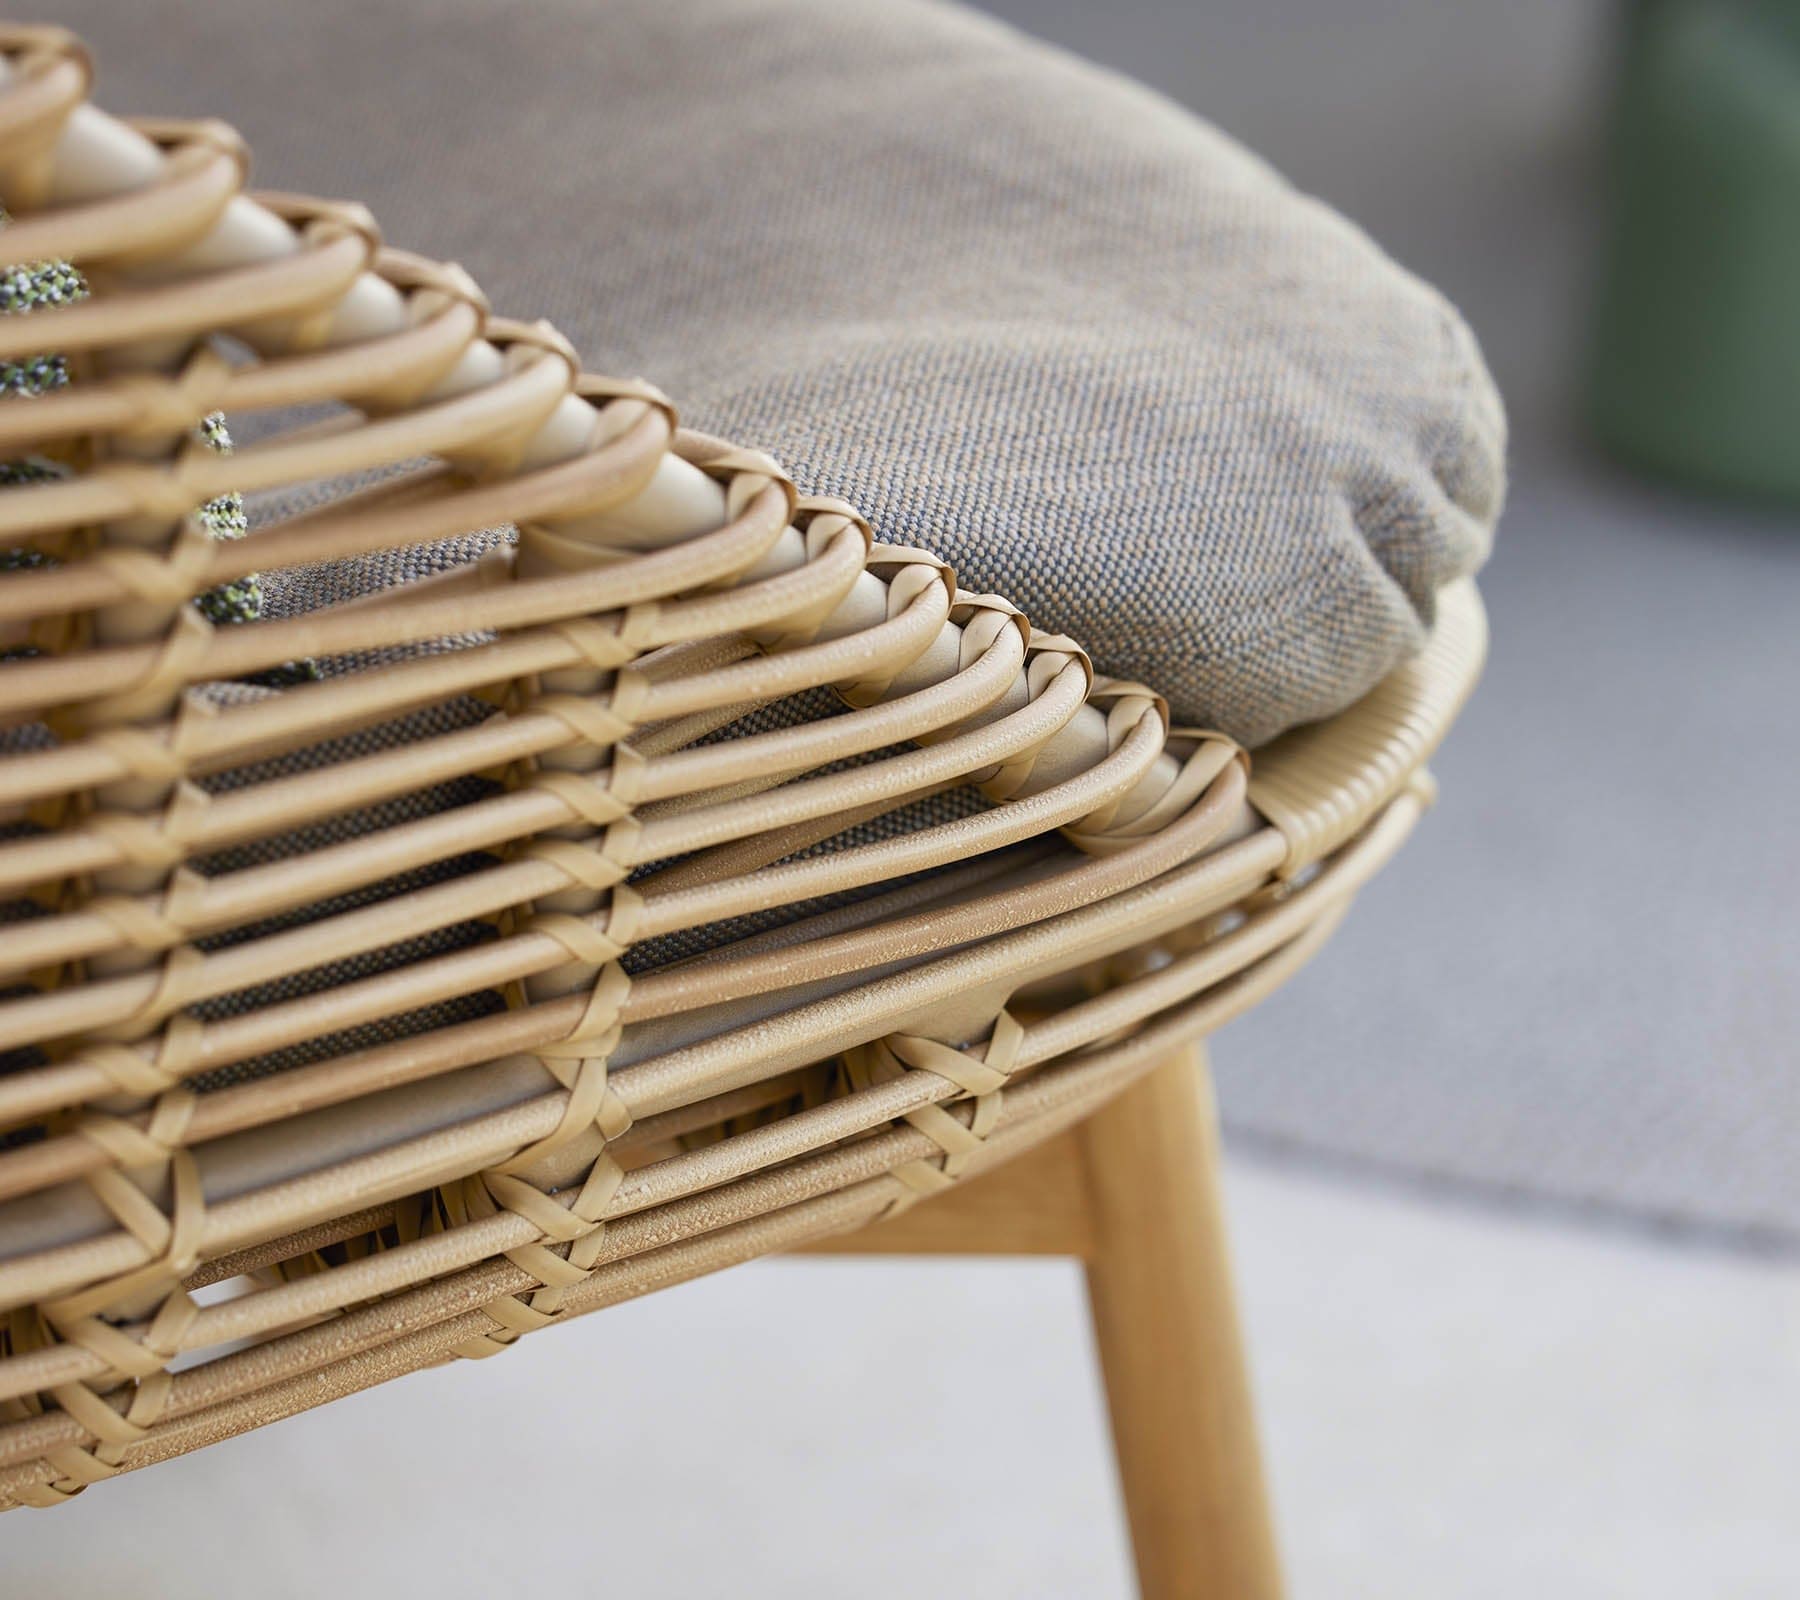 Boxhill's Hive Outdoor Lounge Chair close up view